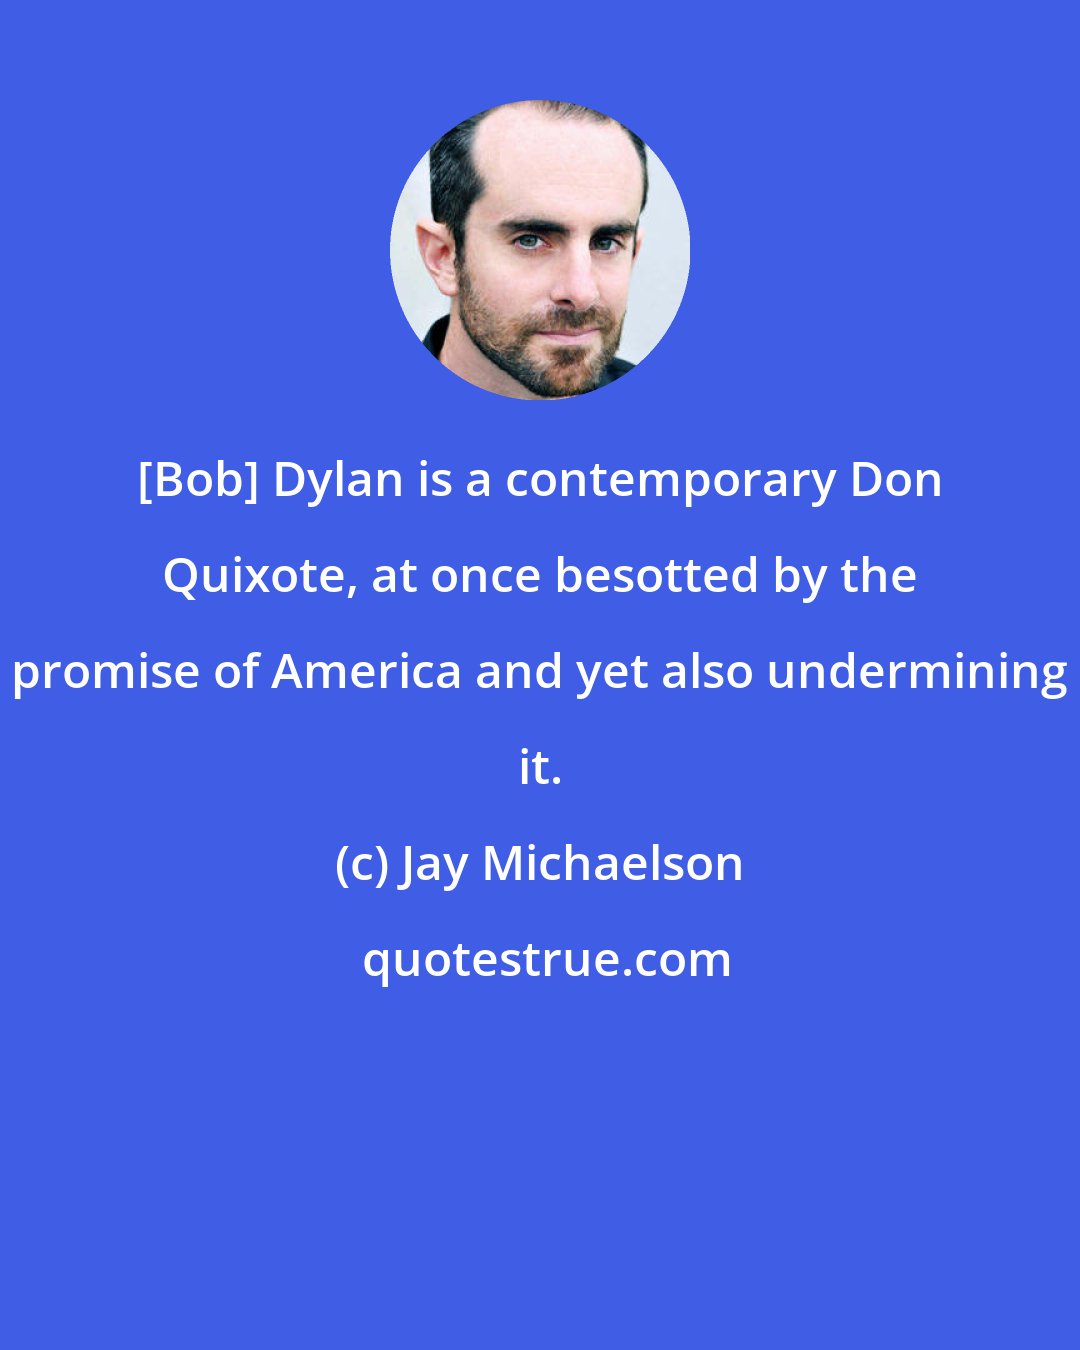 Jay Michaelson: [Bob] Dylan is a contemporary Don Quixote, at once besotted by the promise of America and yet also undermining it.